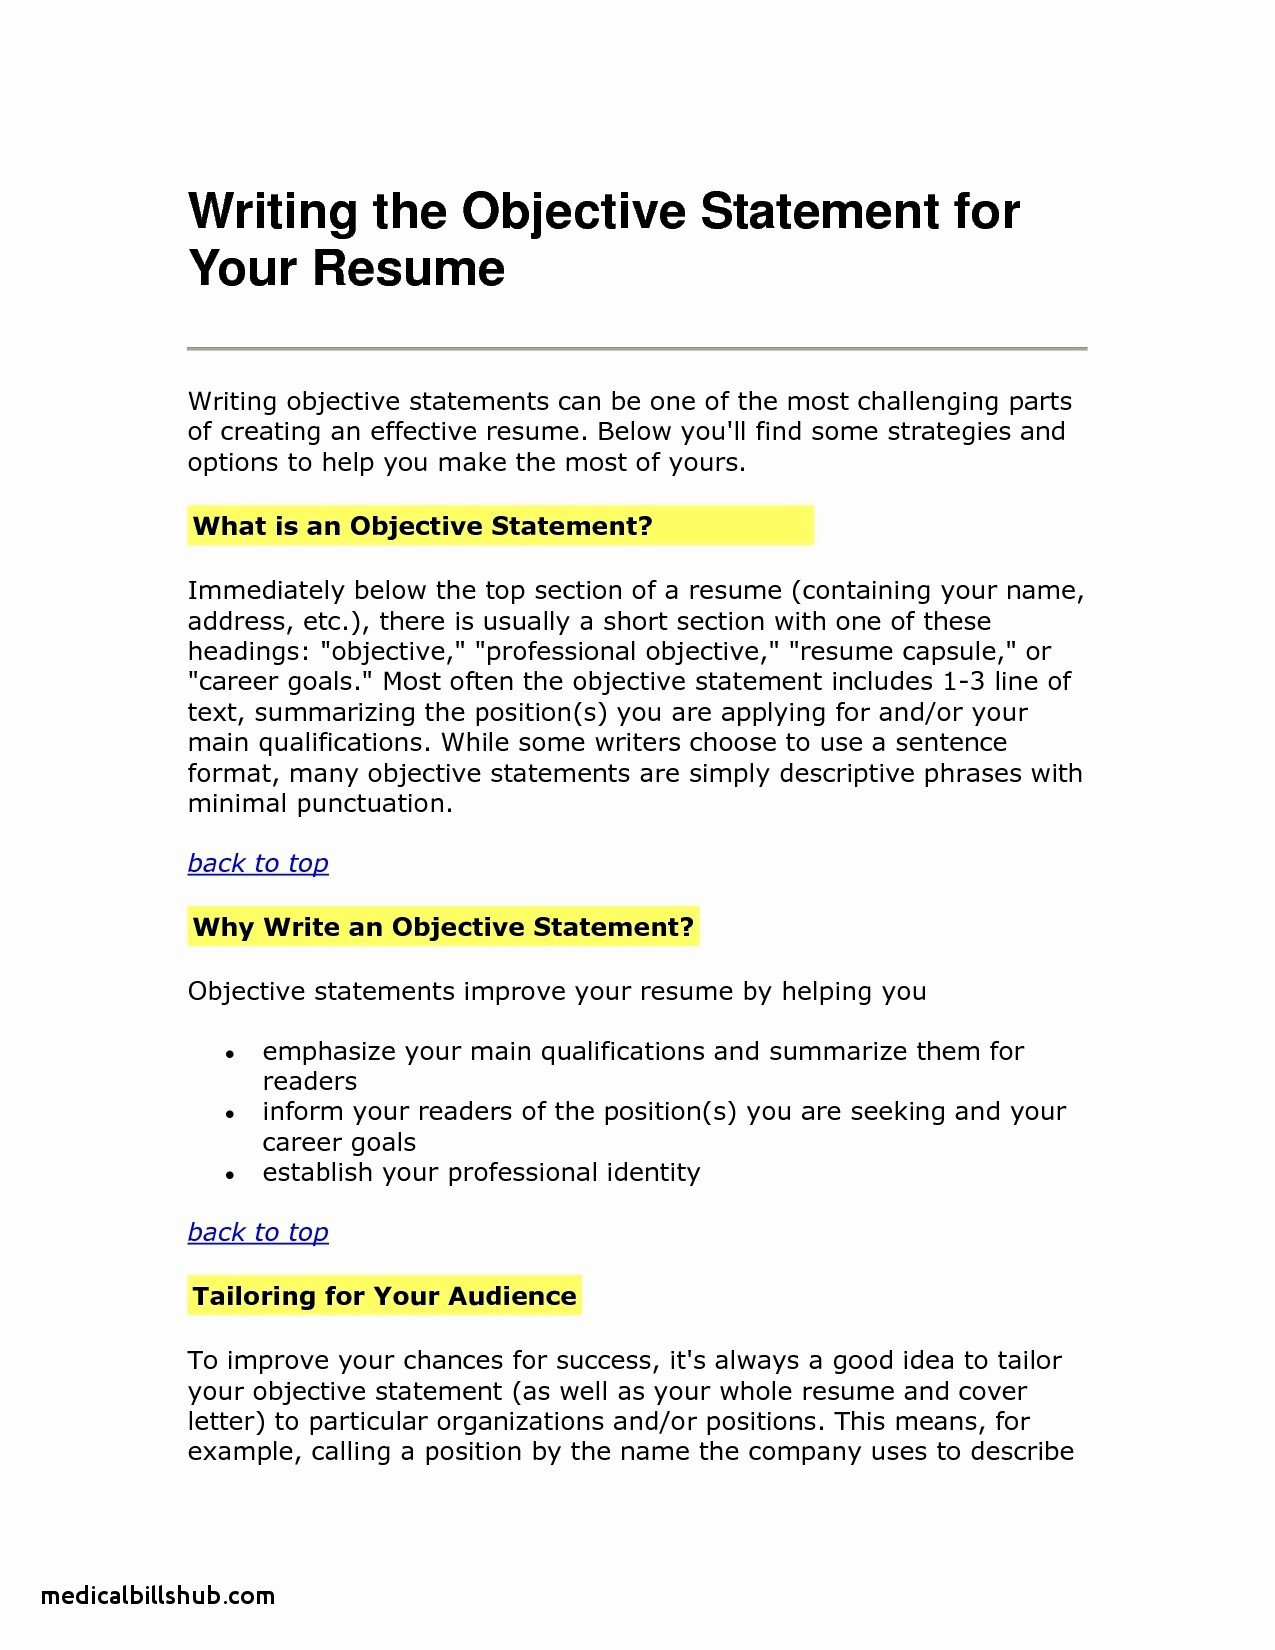 Examples Of Objectives For Resumes Career Objectives For Resumes Examples Objectives In Resume Thomasdegasperi Of Career Objectives For Resumes examples of objectives for resumes|wikiresume.com